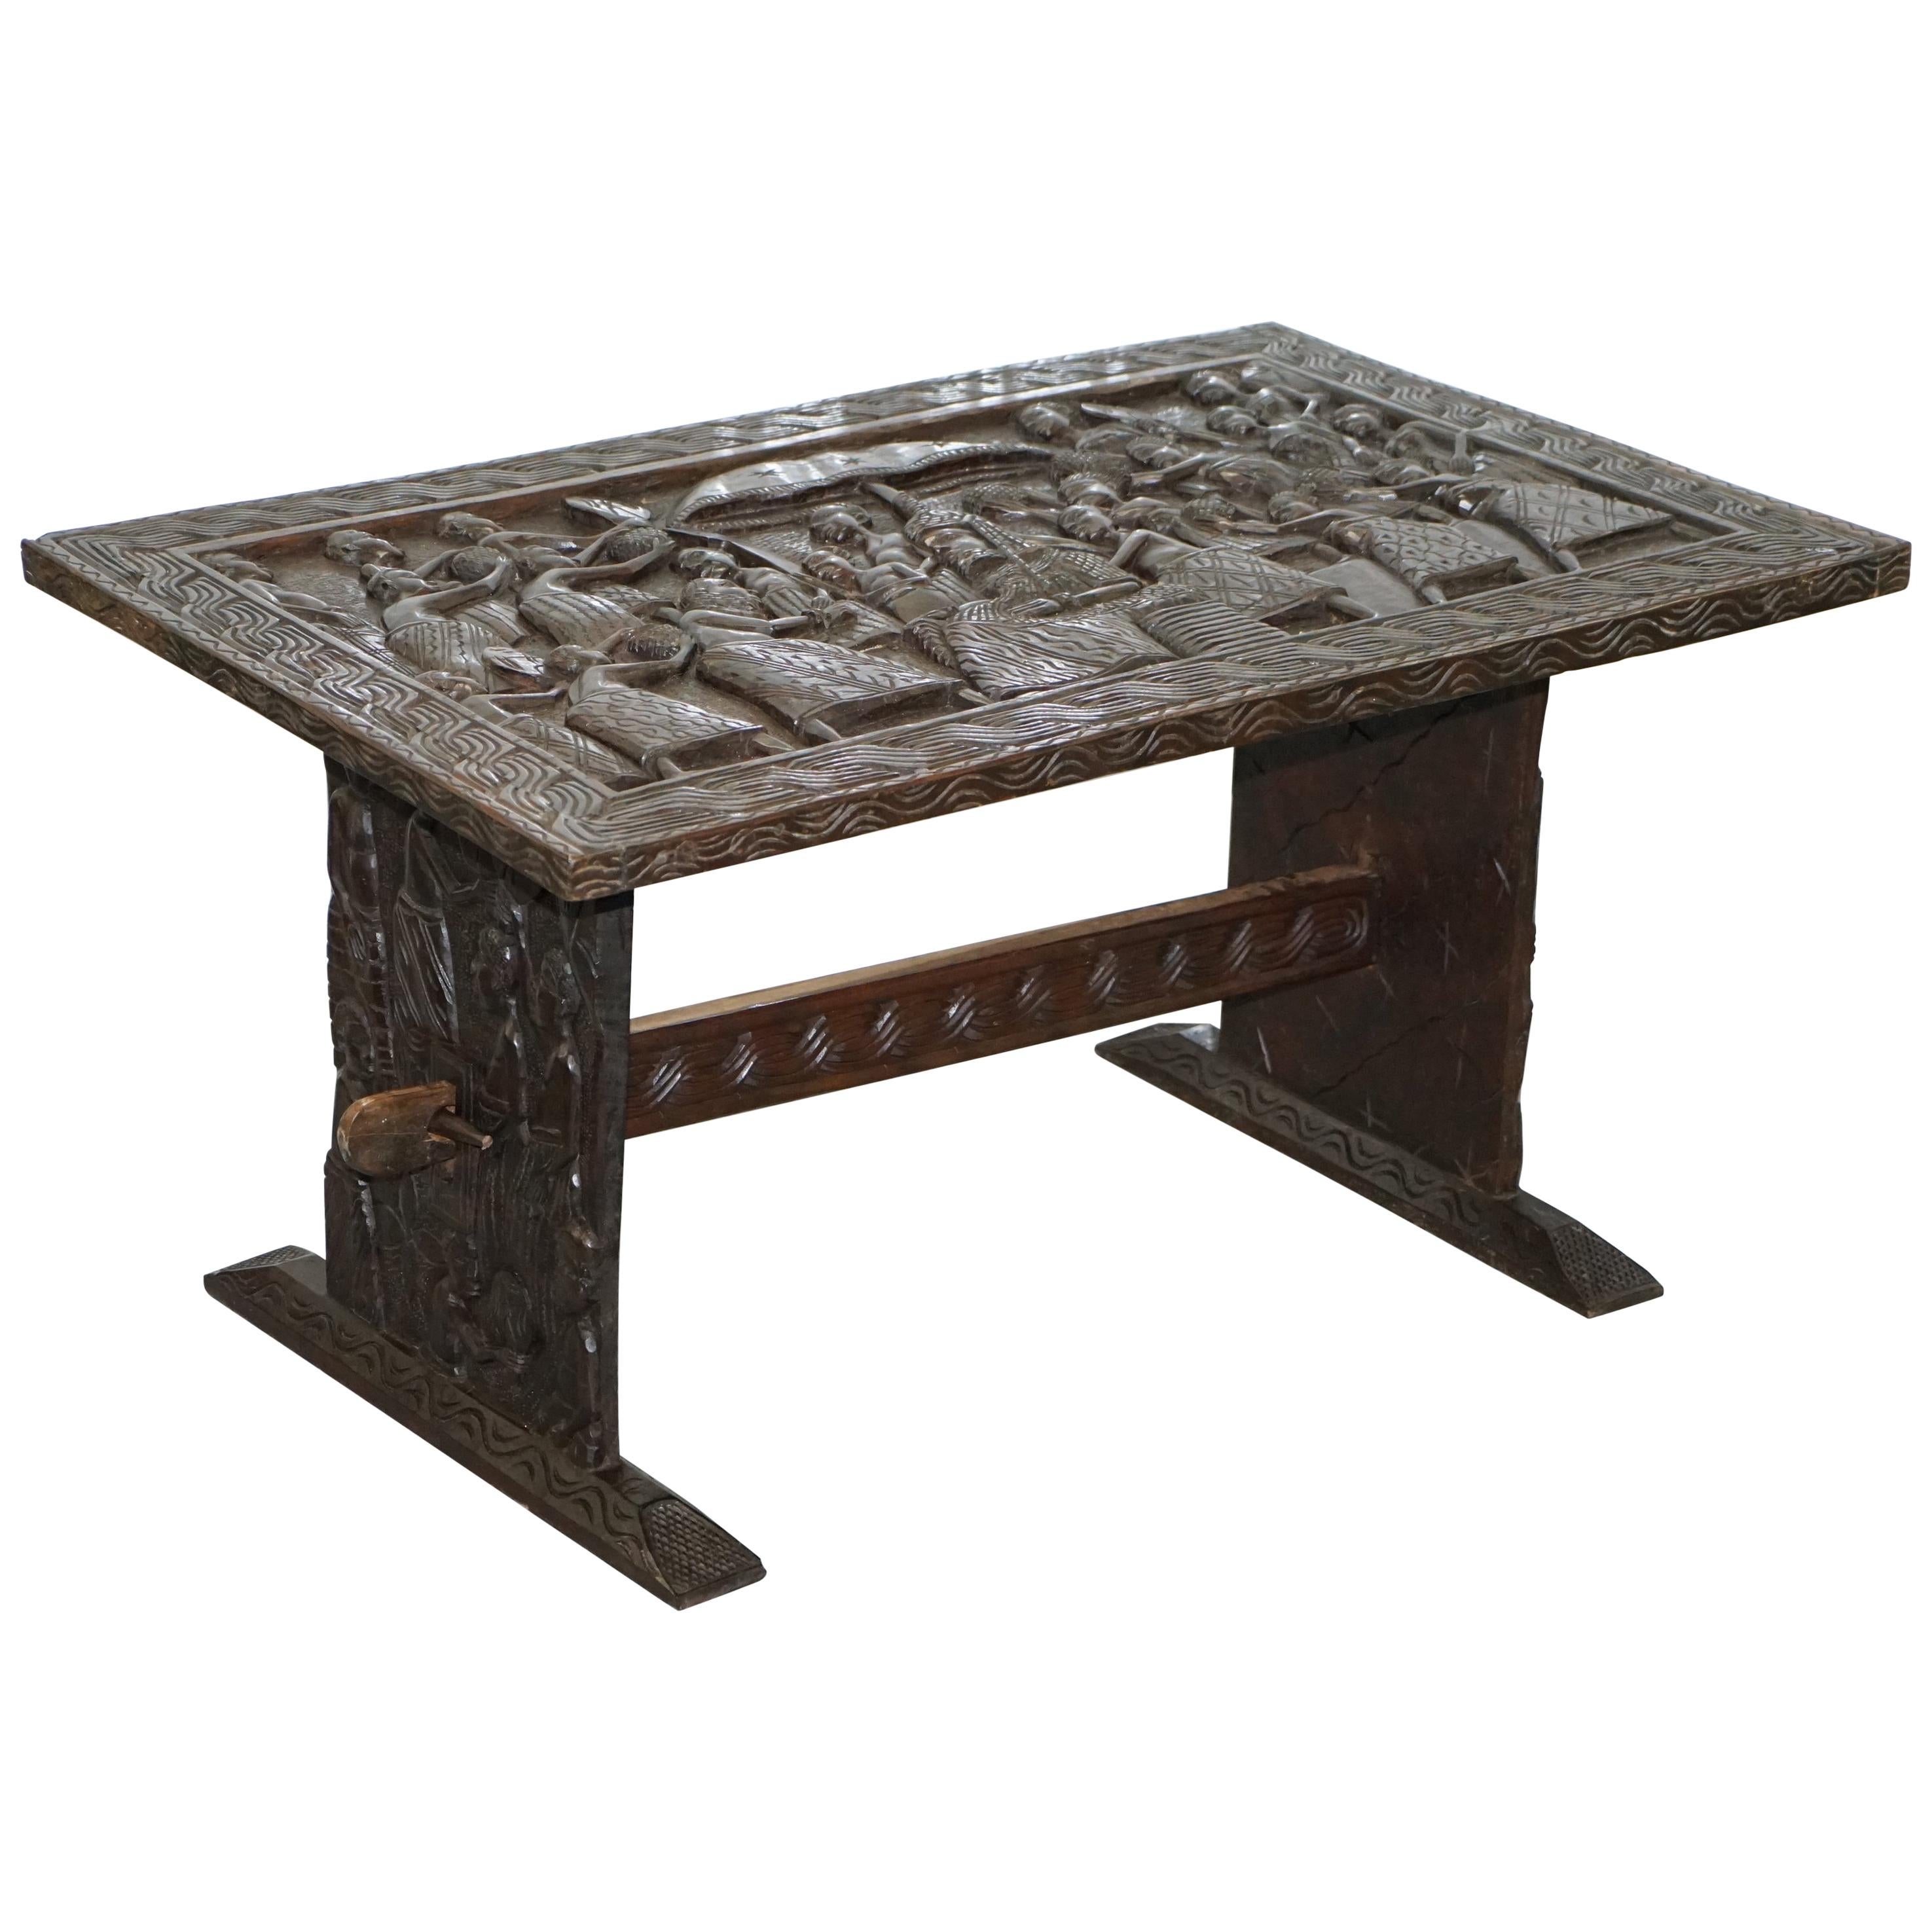 Hand-Carved African Dining Table with Decorative Benin Figures Matching Chairs